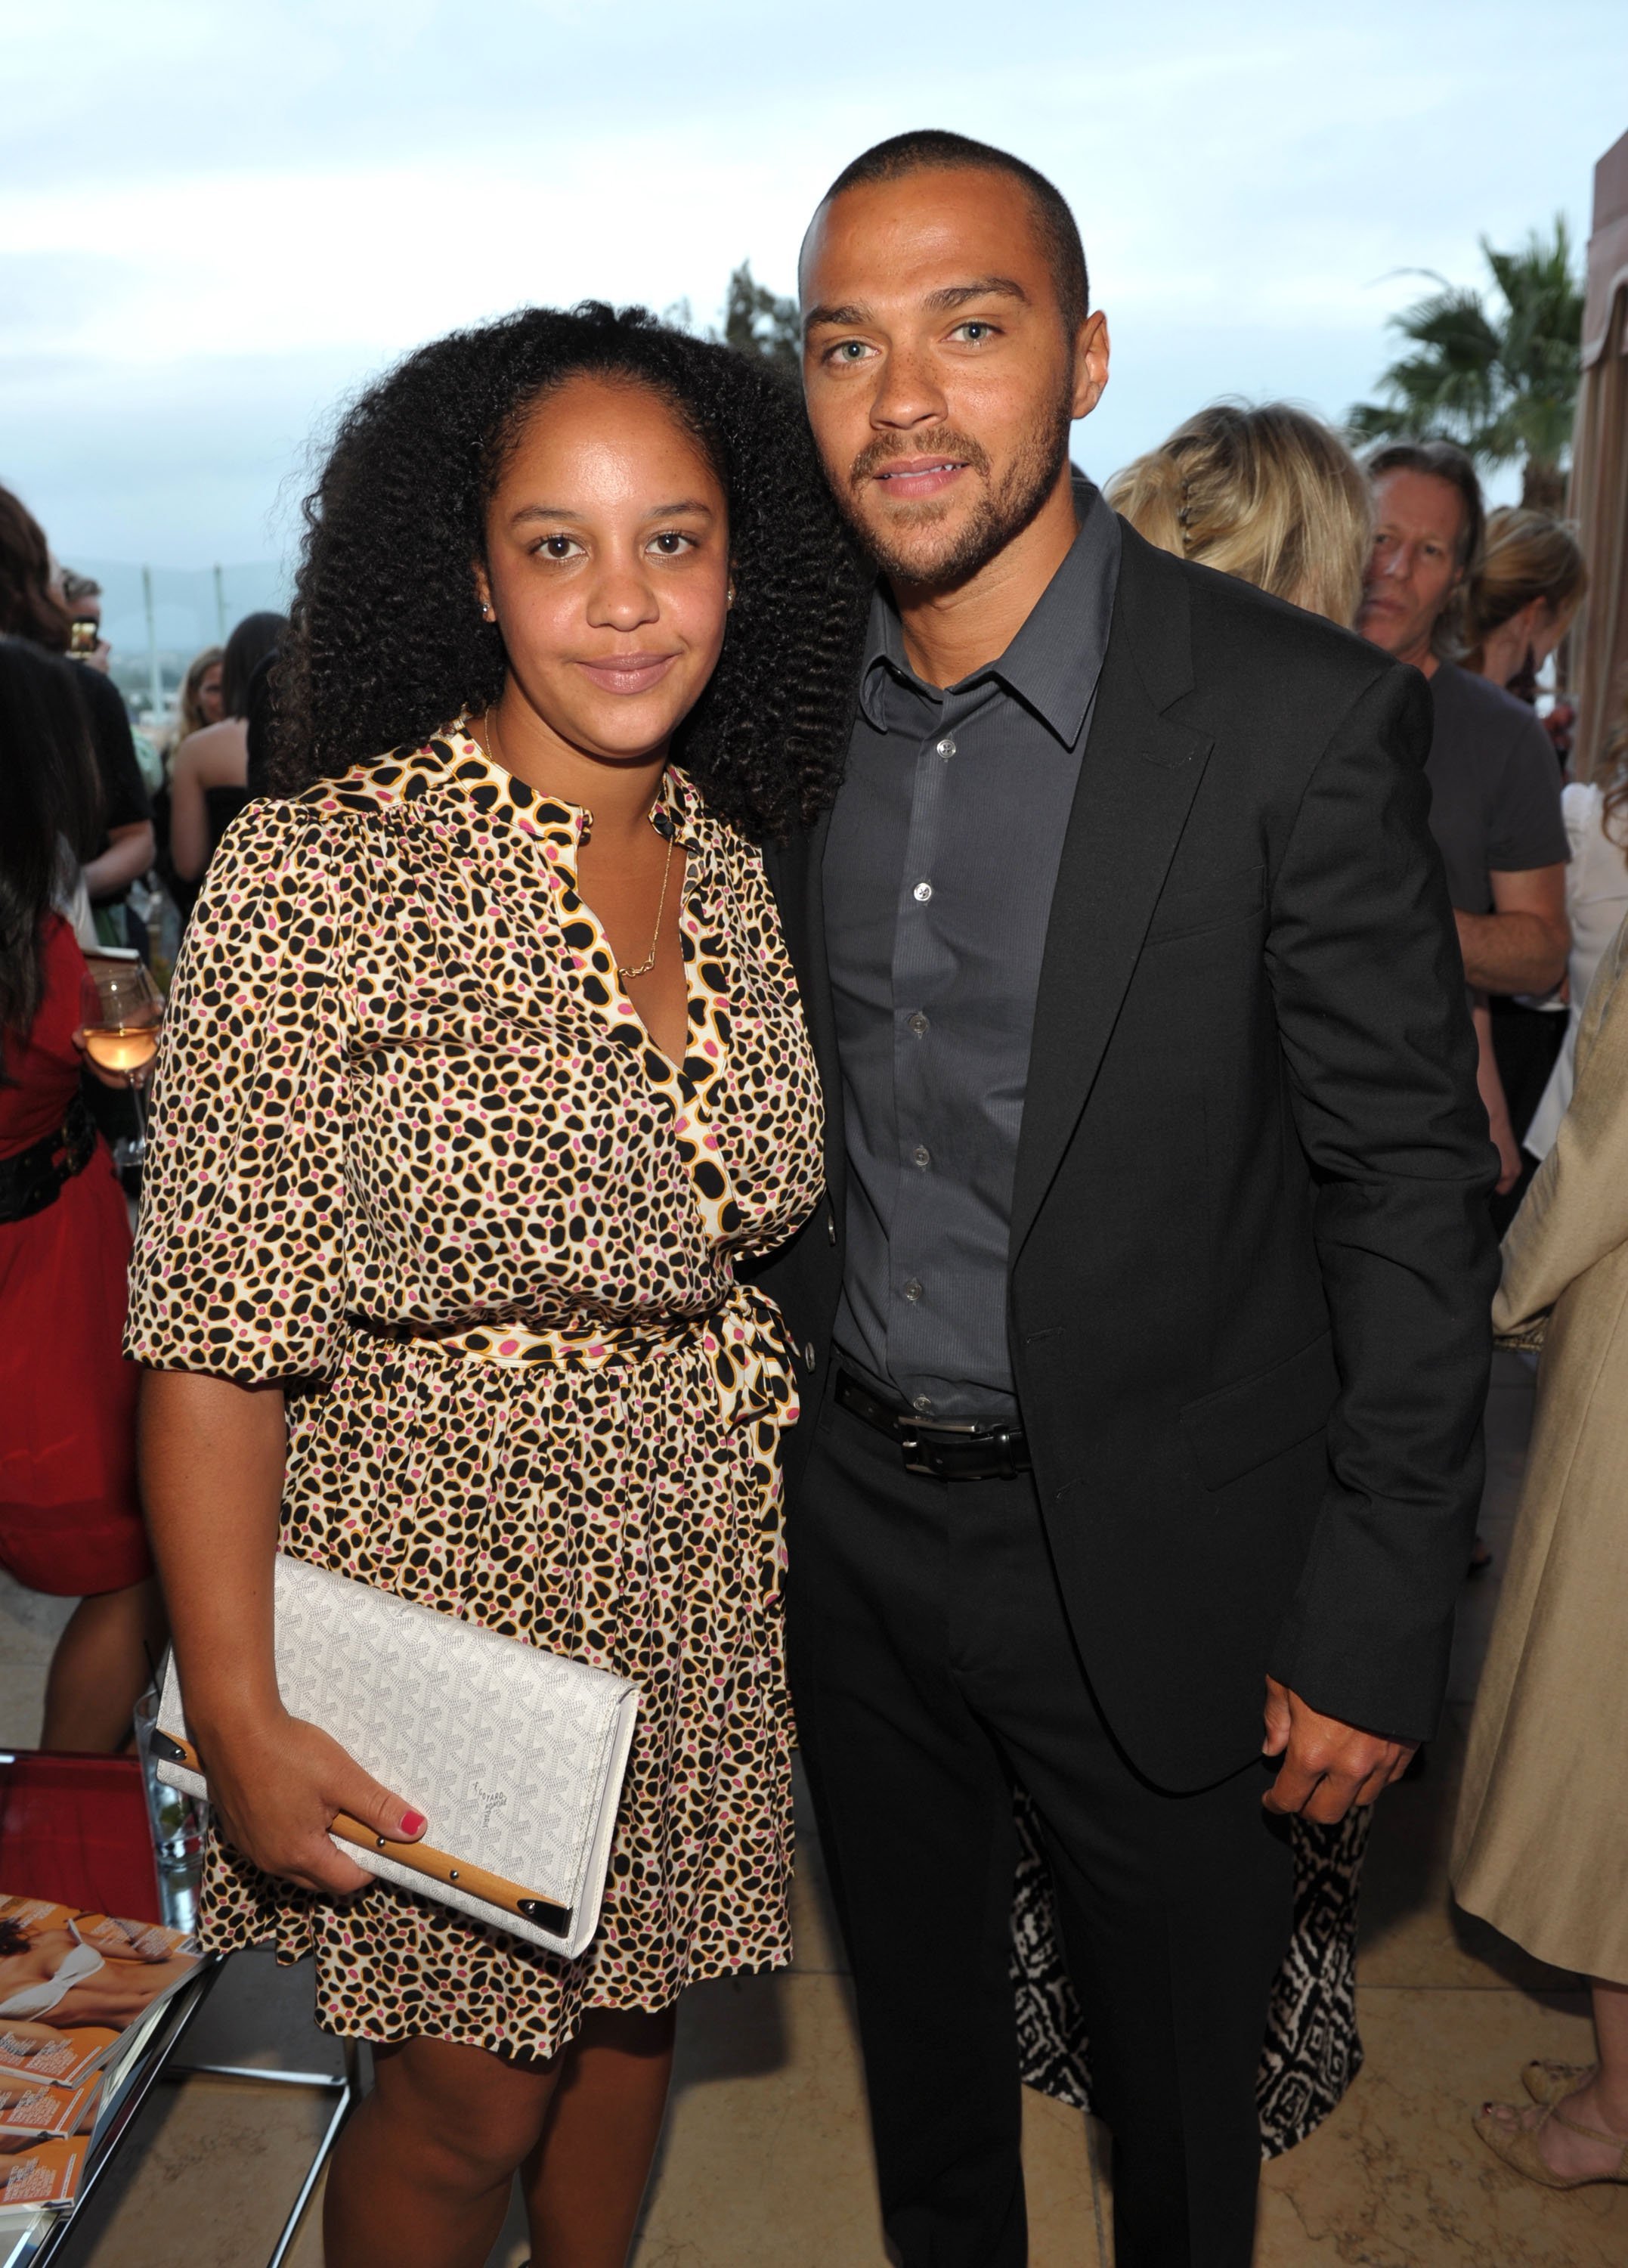 Jesse Williams & Aryn Drake-Lee at the "GQ, Nautica, and Oceana World Oceans Day Party" in California on June 8, 2010 | Photo: Getty Images